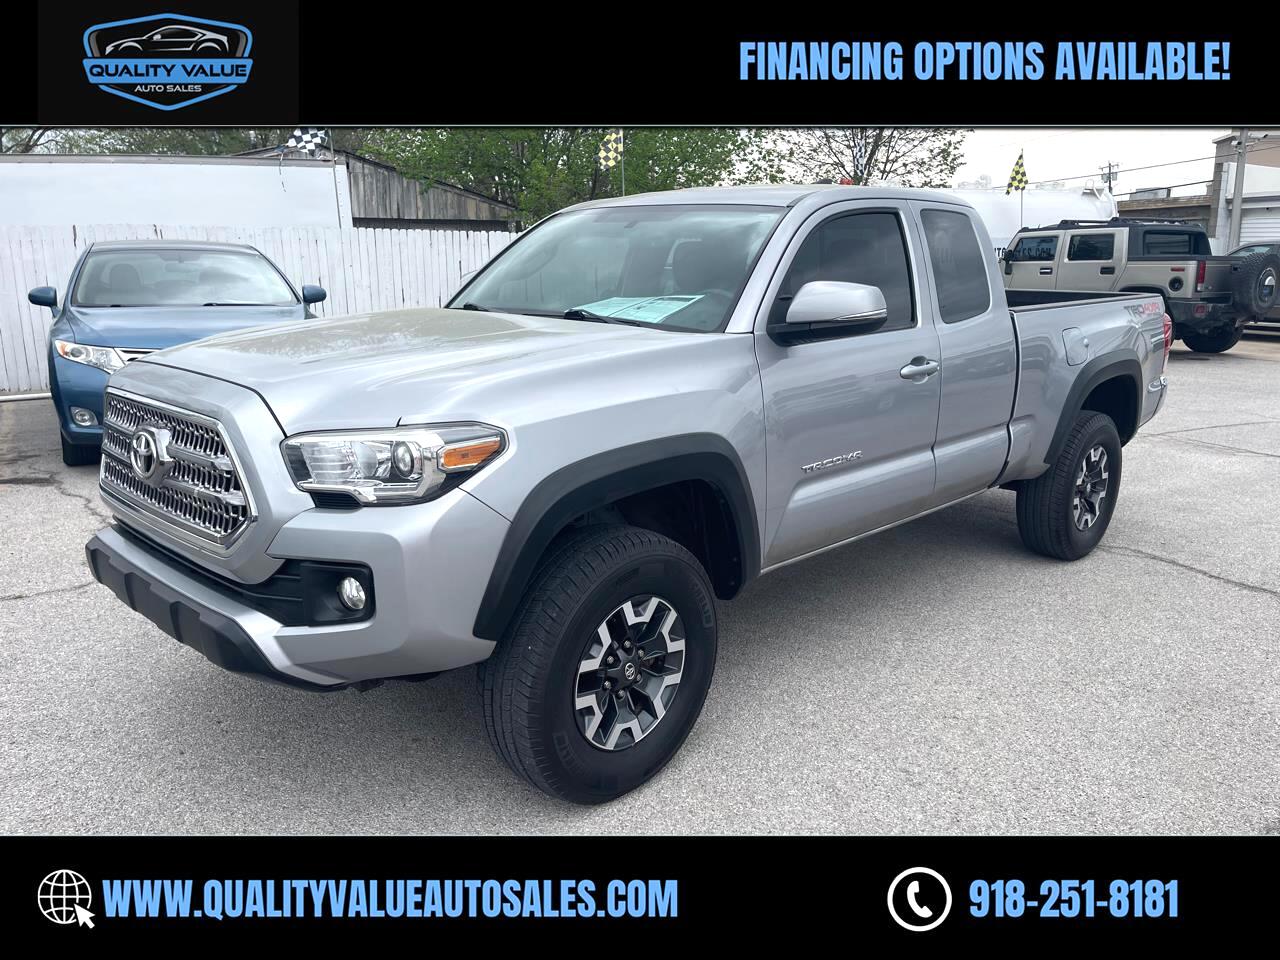 2016 Toyota Tacoma TRD Offroad Access Cab 4WD V6 at